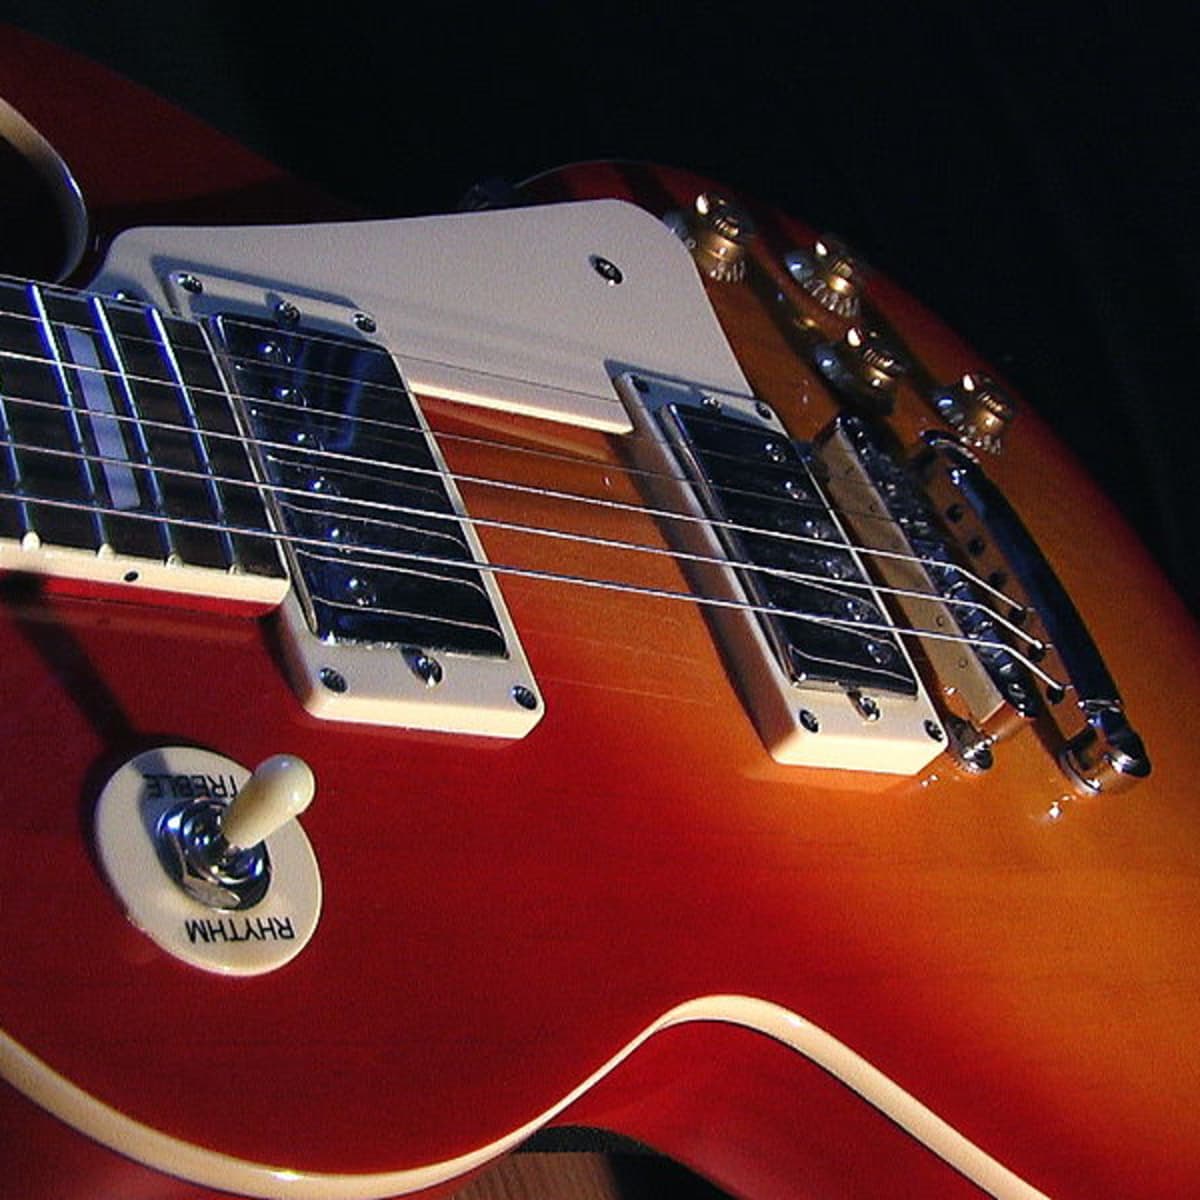 Epiphone Les Paul vs. Gibson Les Paul Guitar Review - Spinditty